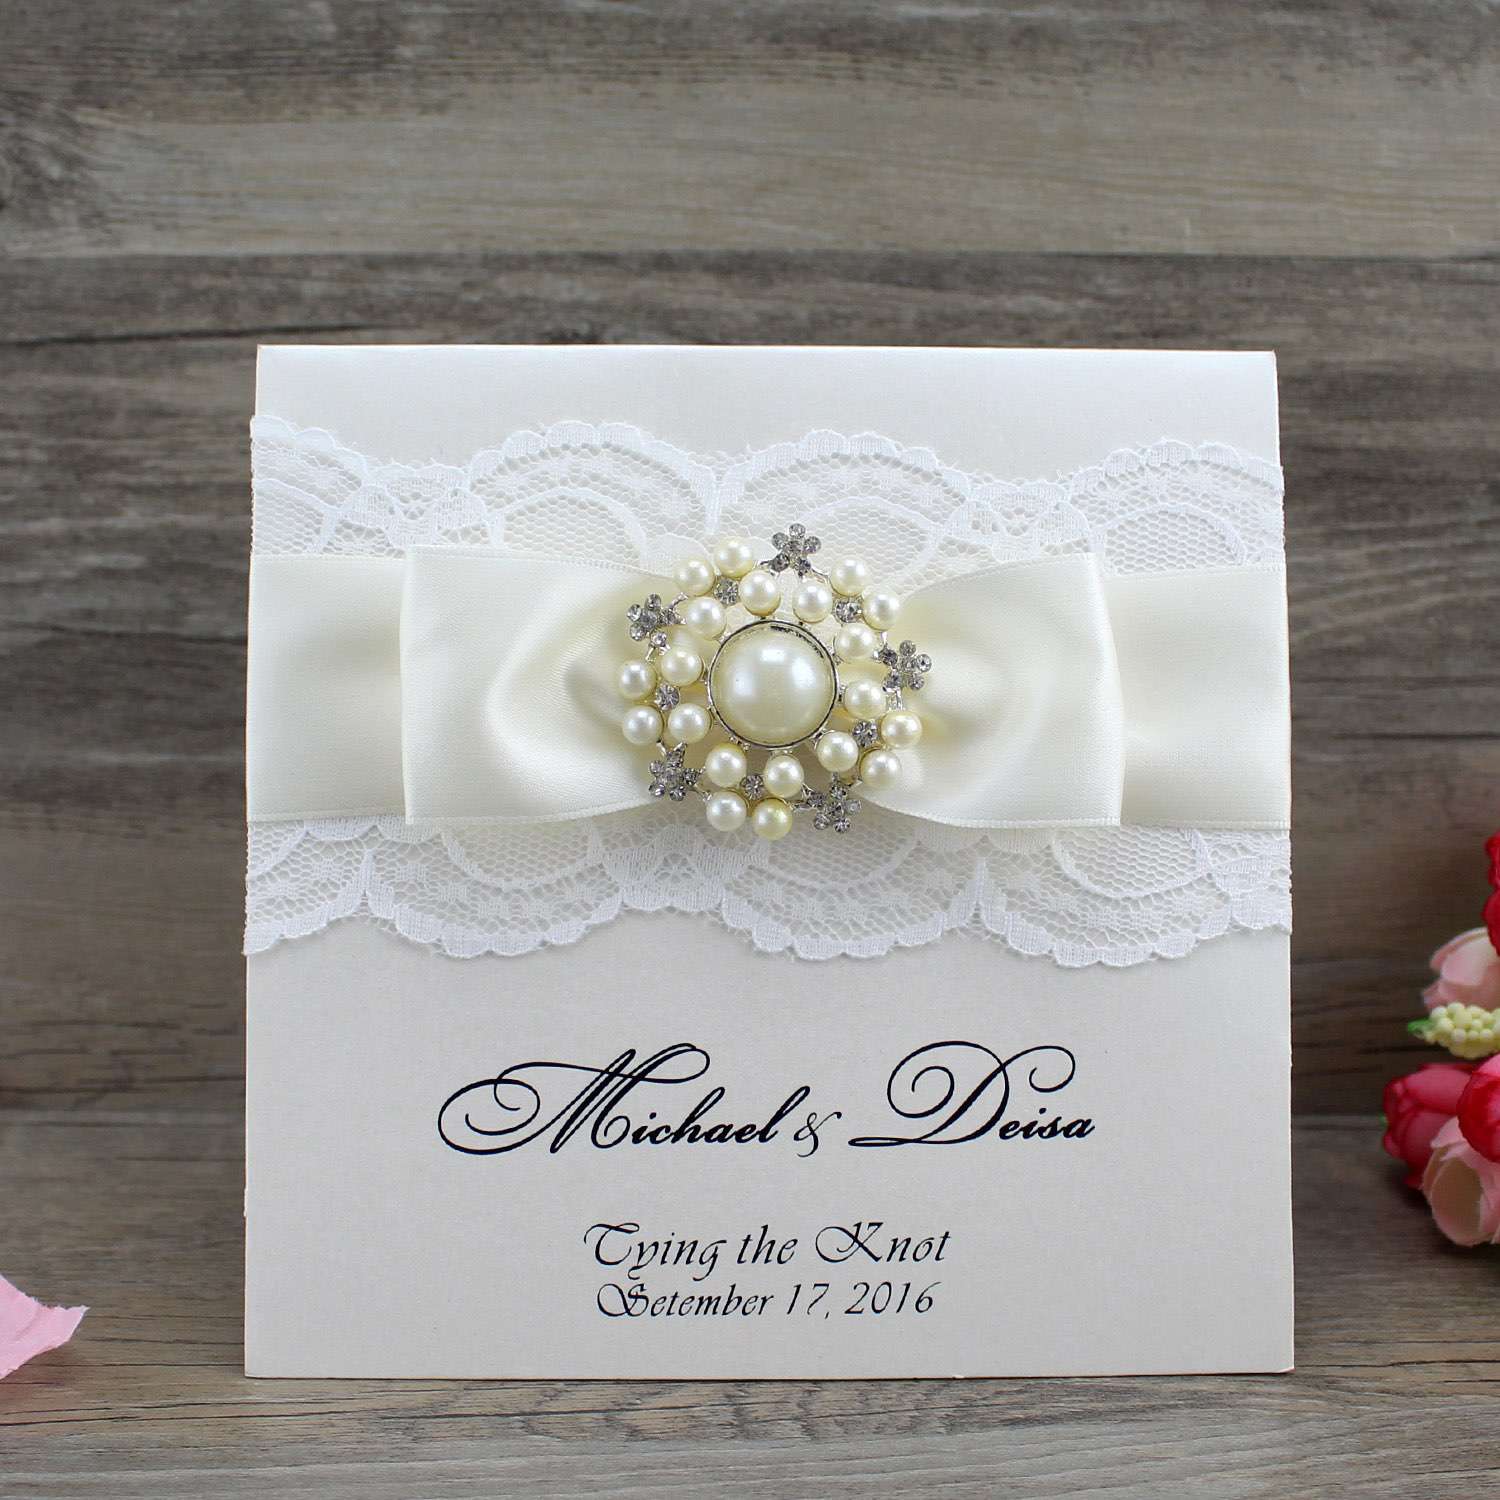 Lace Greeting Card Customized Half Fold Invitation with Buckle Decoration Wedding Invites Reception Card 